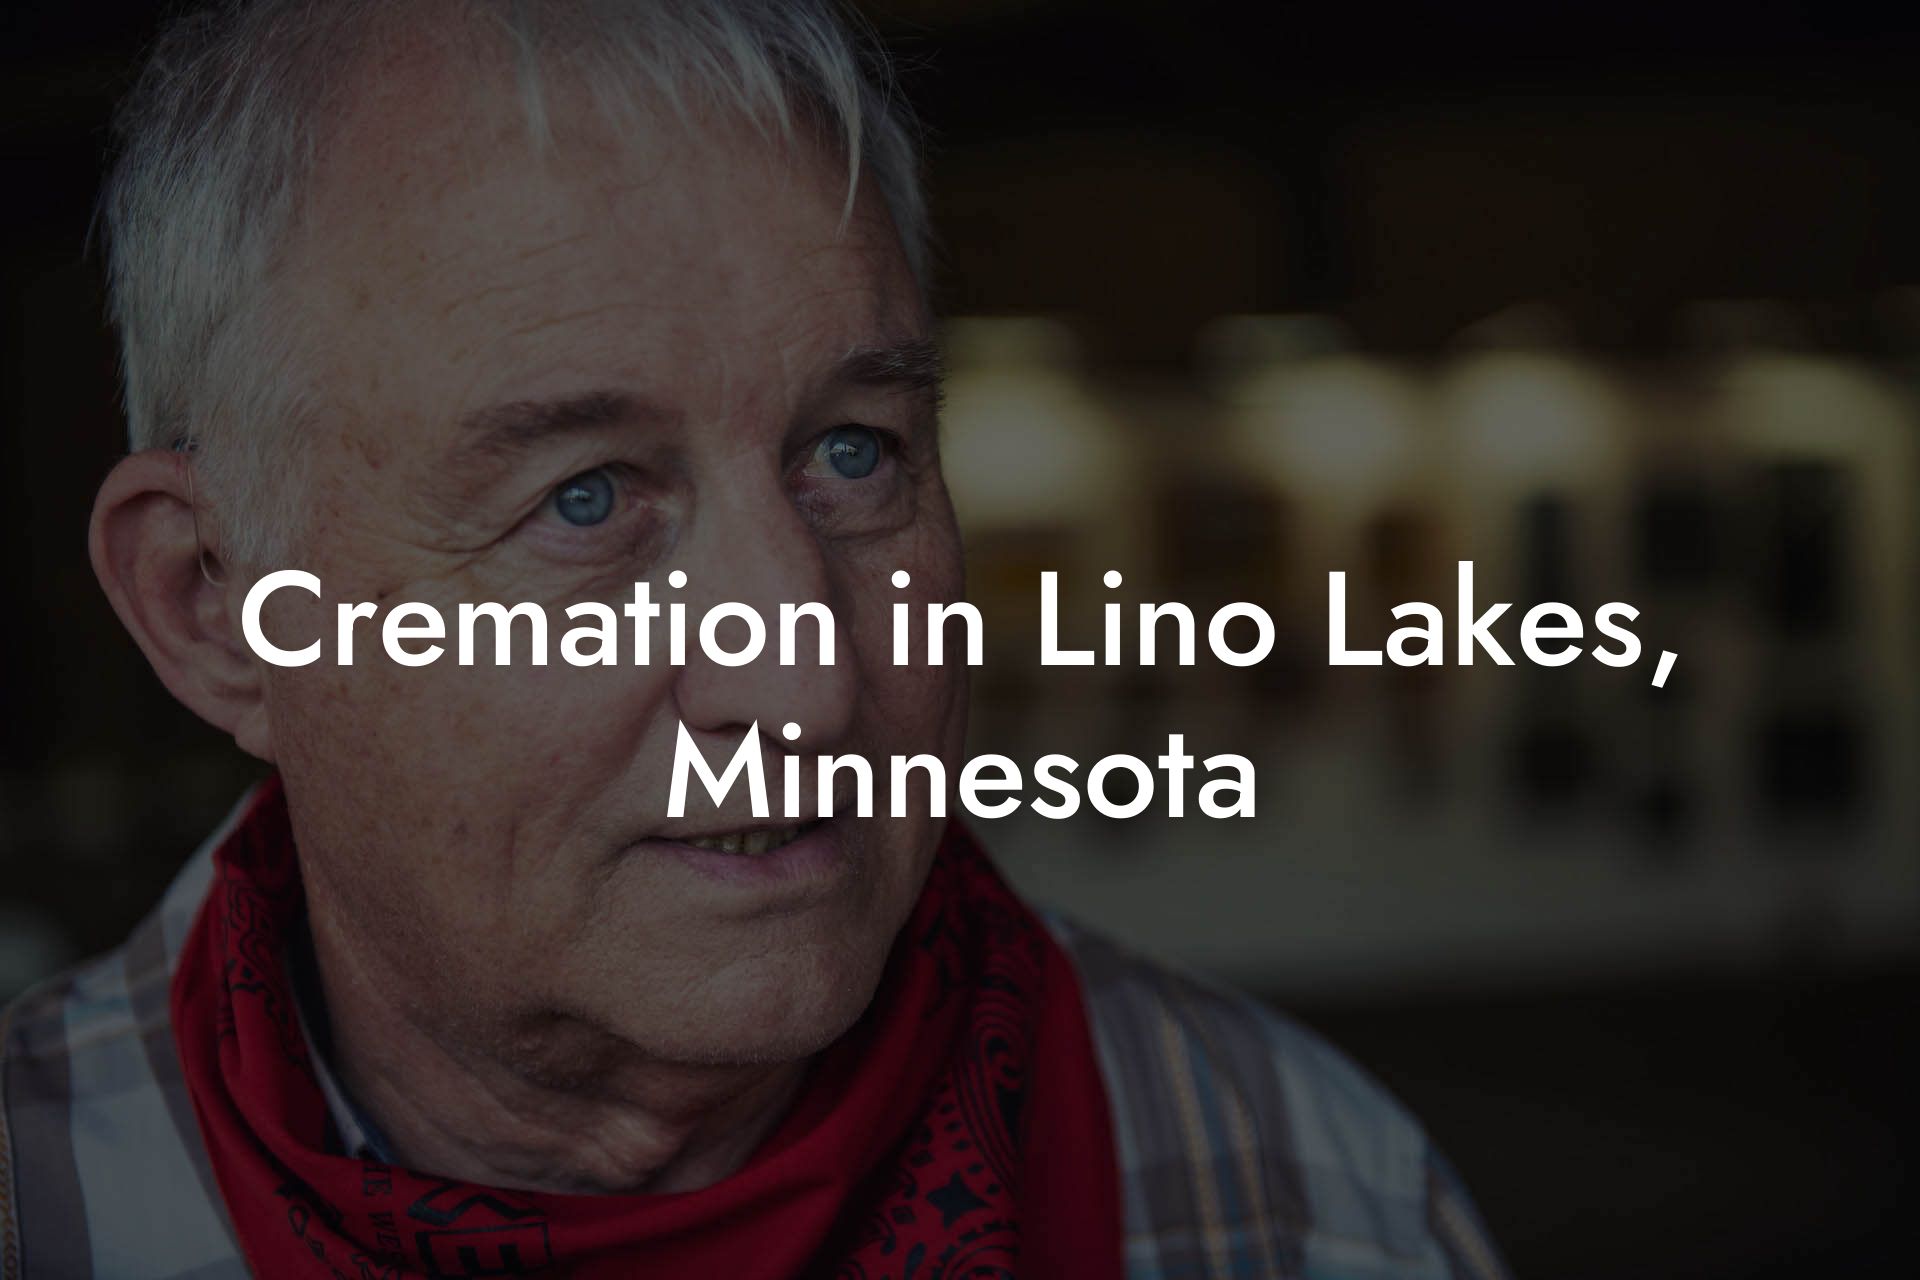 Cremation in Lino Lakes, Minnesota